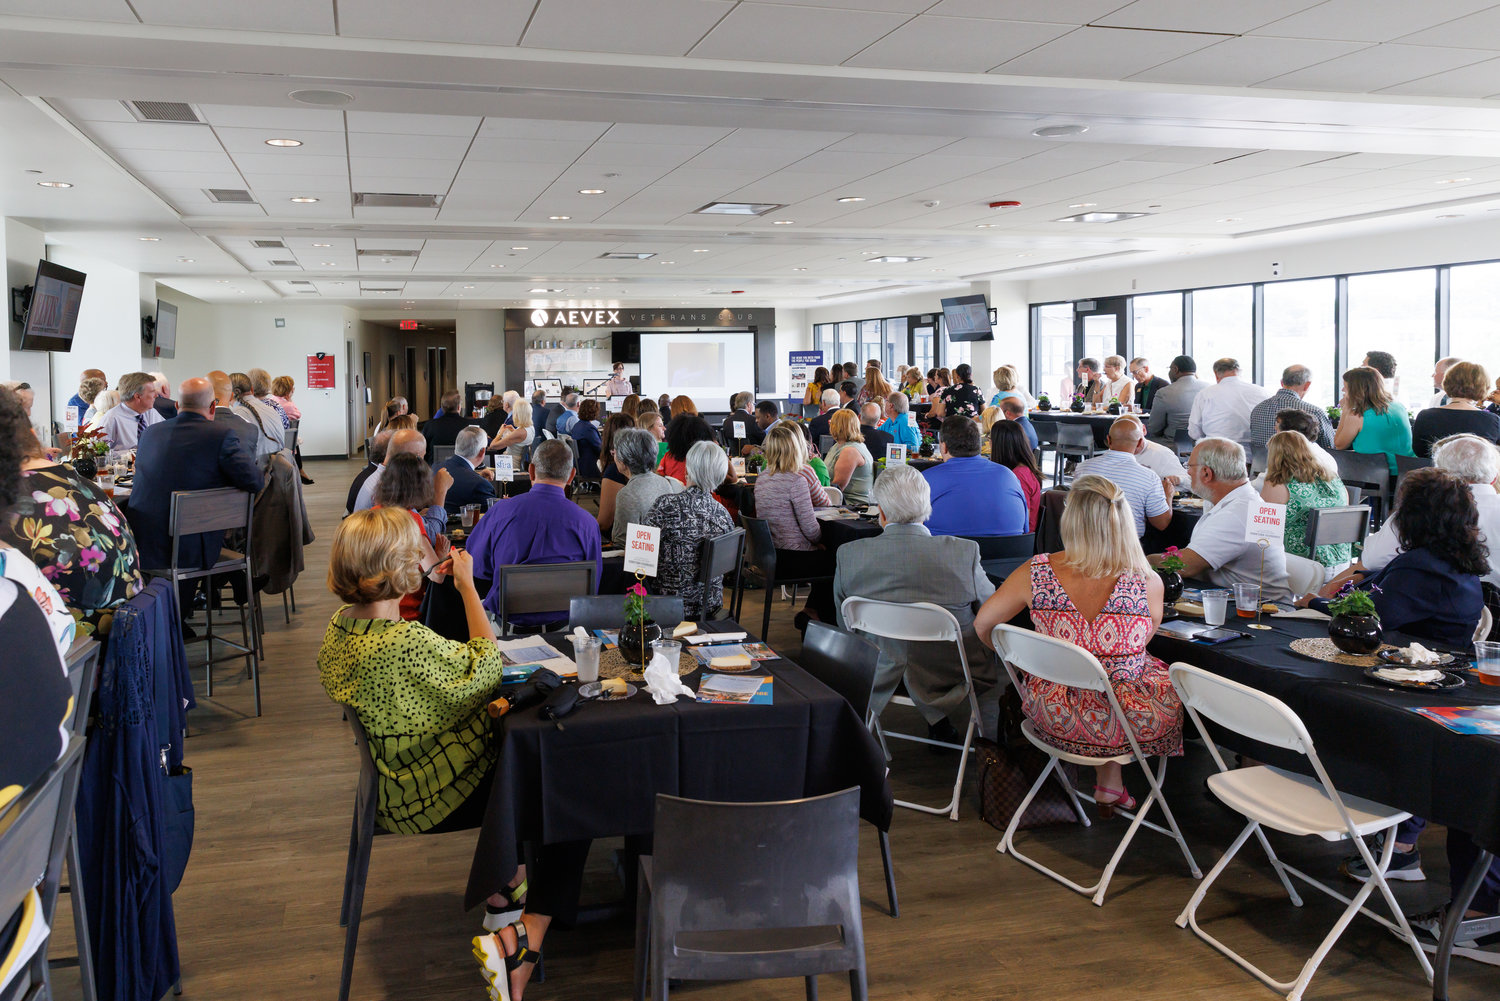 Attendees hear updates on community projects during the 2022 CityView Downtown Visionaries Luncheon Wednesday at Segra Stadium.